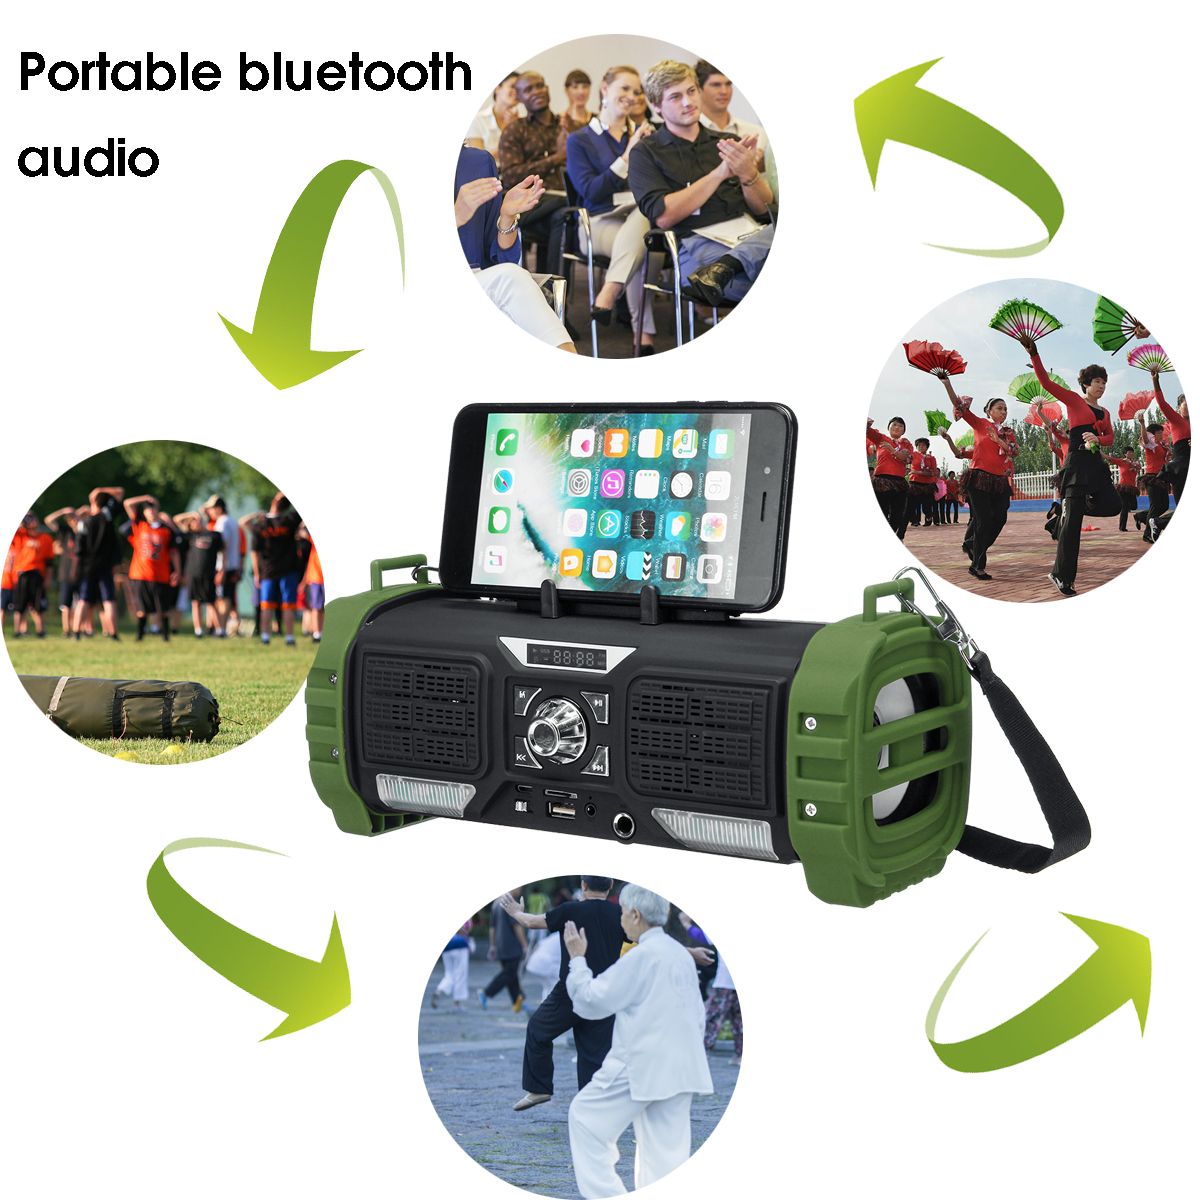 Portable-Wireless-bluetooth-Speaker-LED-Light-Heavy-Bass-2200mAh-TF-Card-Speaker-with-Mic-with-Phone-1503608